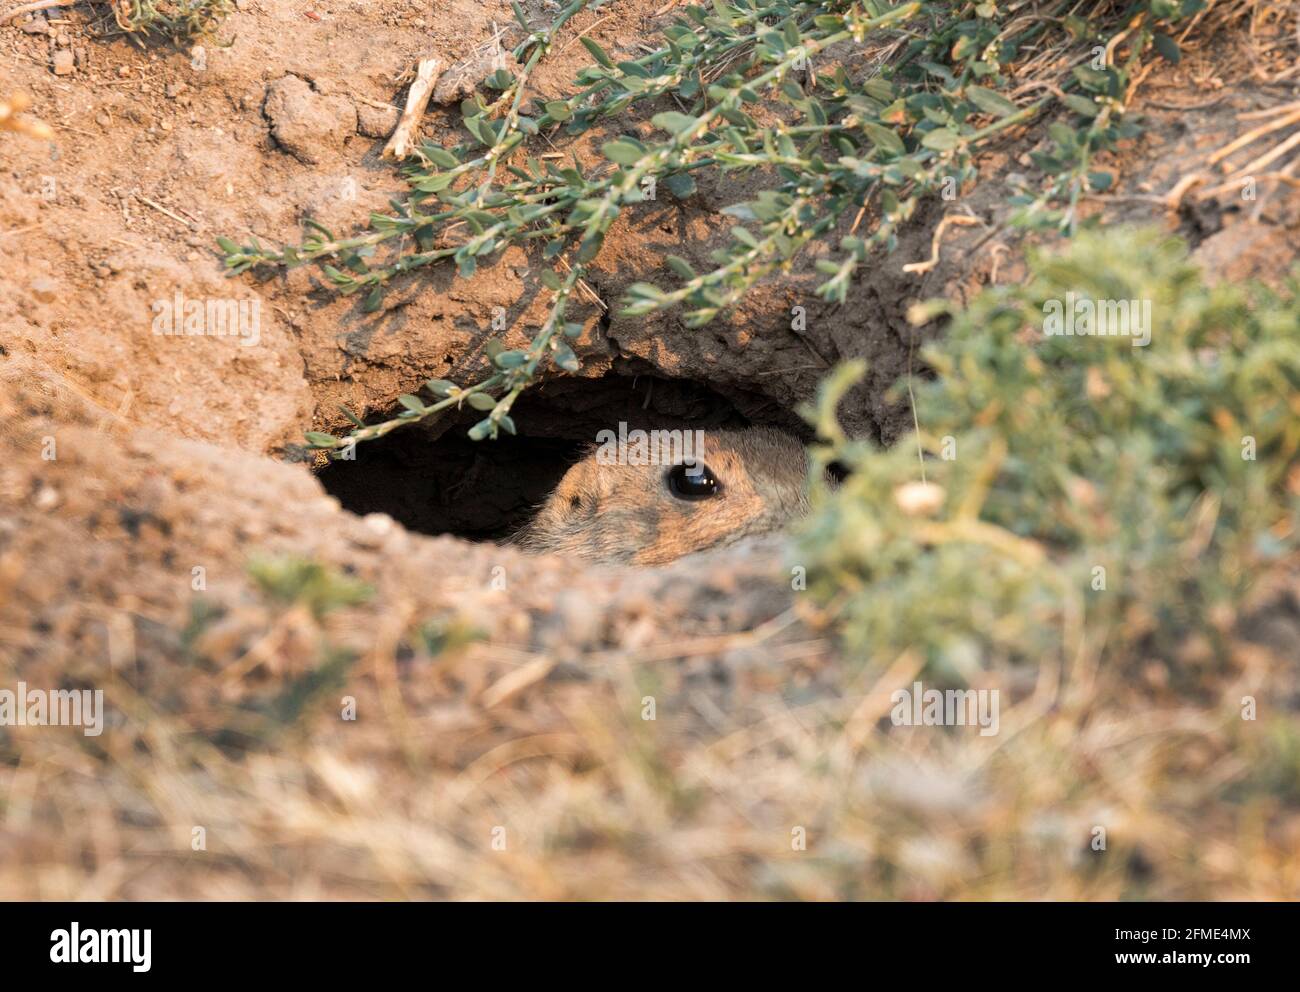 Black-tailed prairie dog, Cynomys ludovicianus, peering out of burrow, Greycliff Prairie Dog Town State Park, Greycliff, Montana, USA Stock Photo